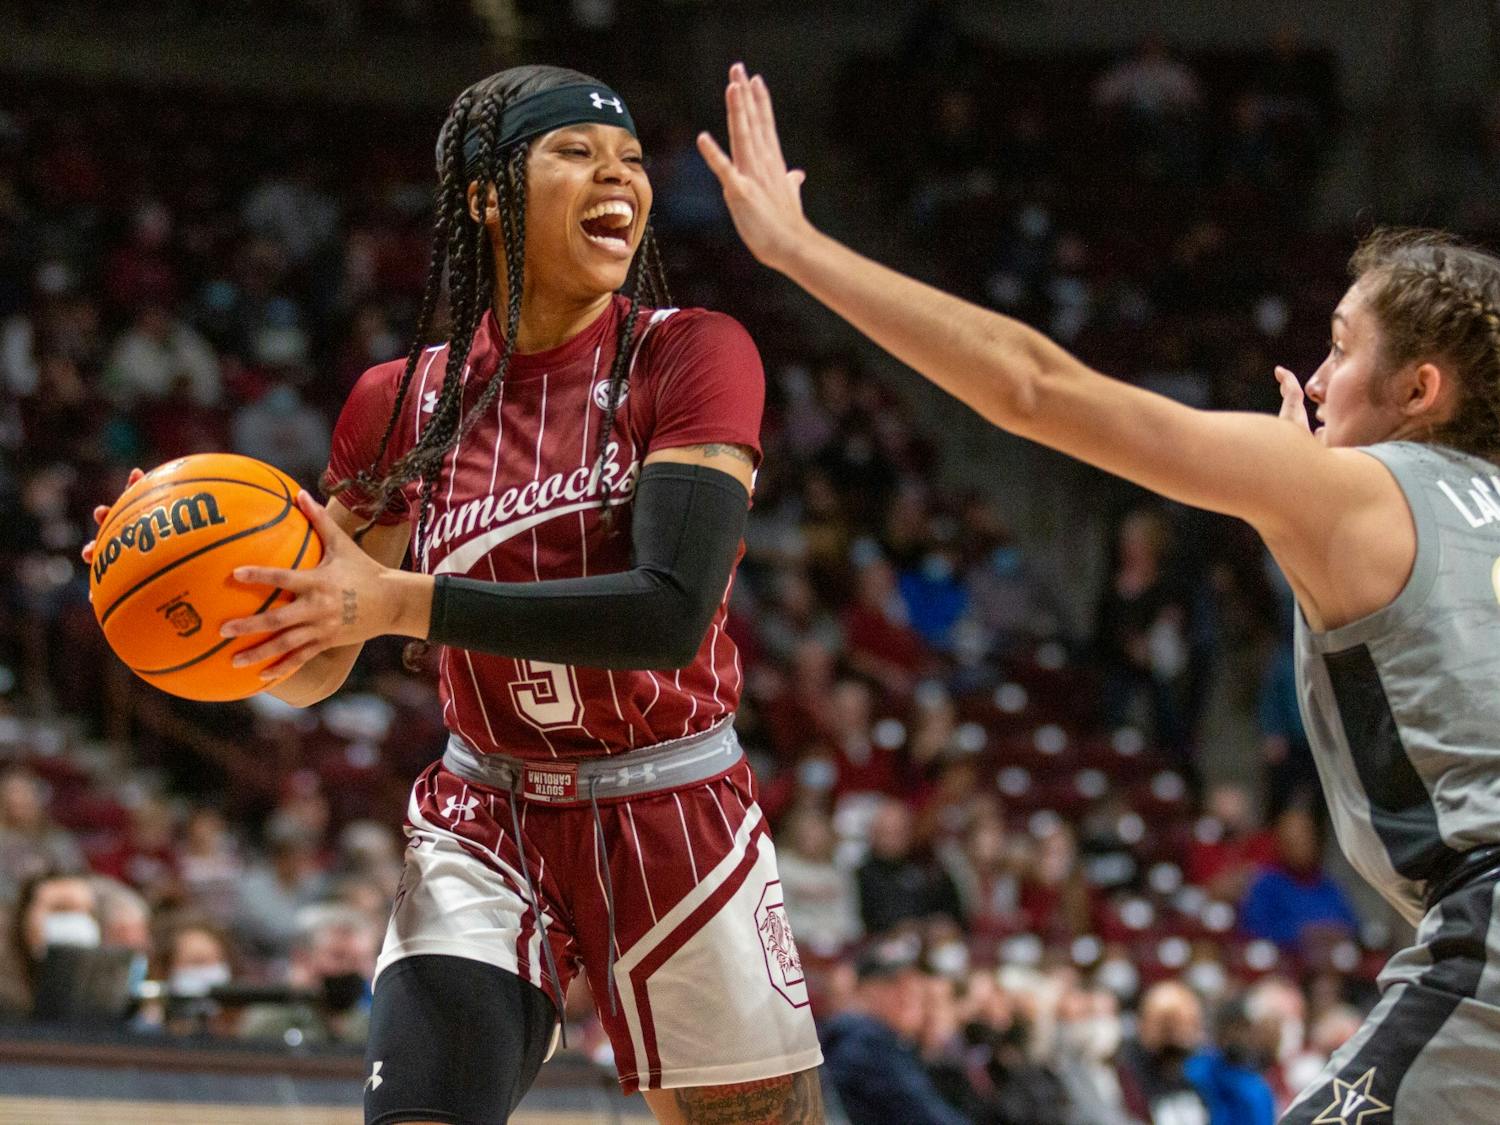 Senior Guard Destanni Henderson searches for an open teammate in a game against Vanderbilt at Colonial Life Arena on January 24, 2022. The Gamecocks dominated both halves and defeated the Commodores 85-30.